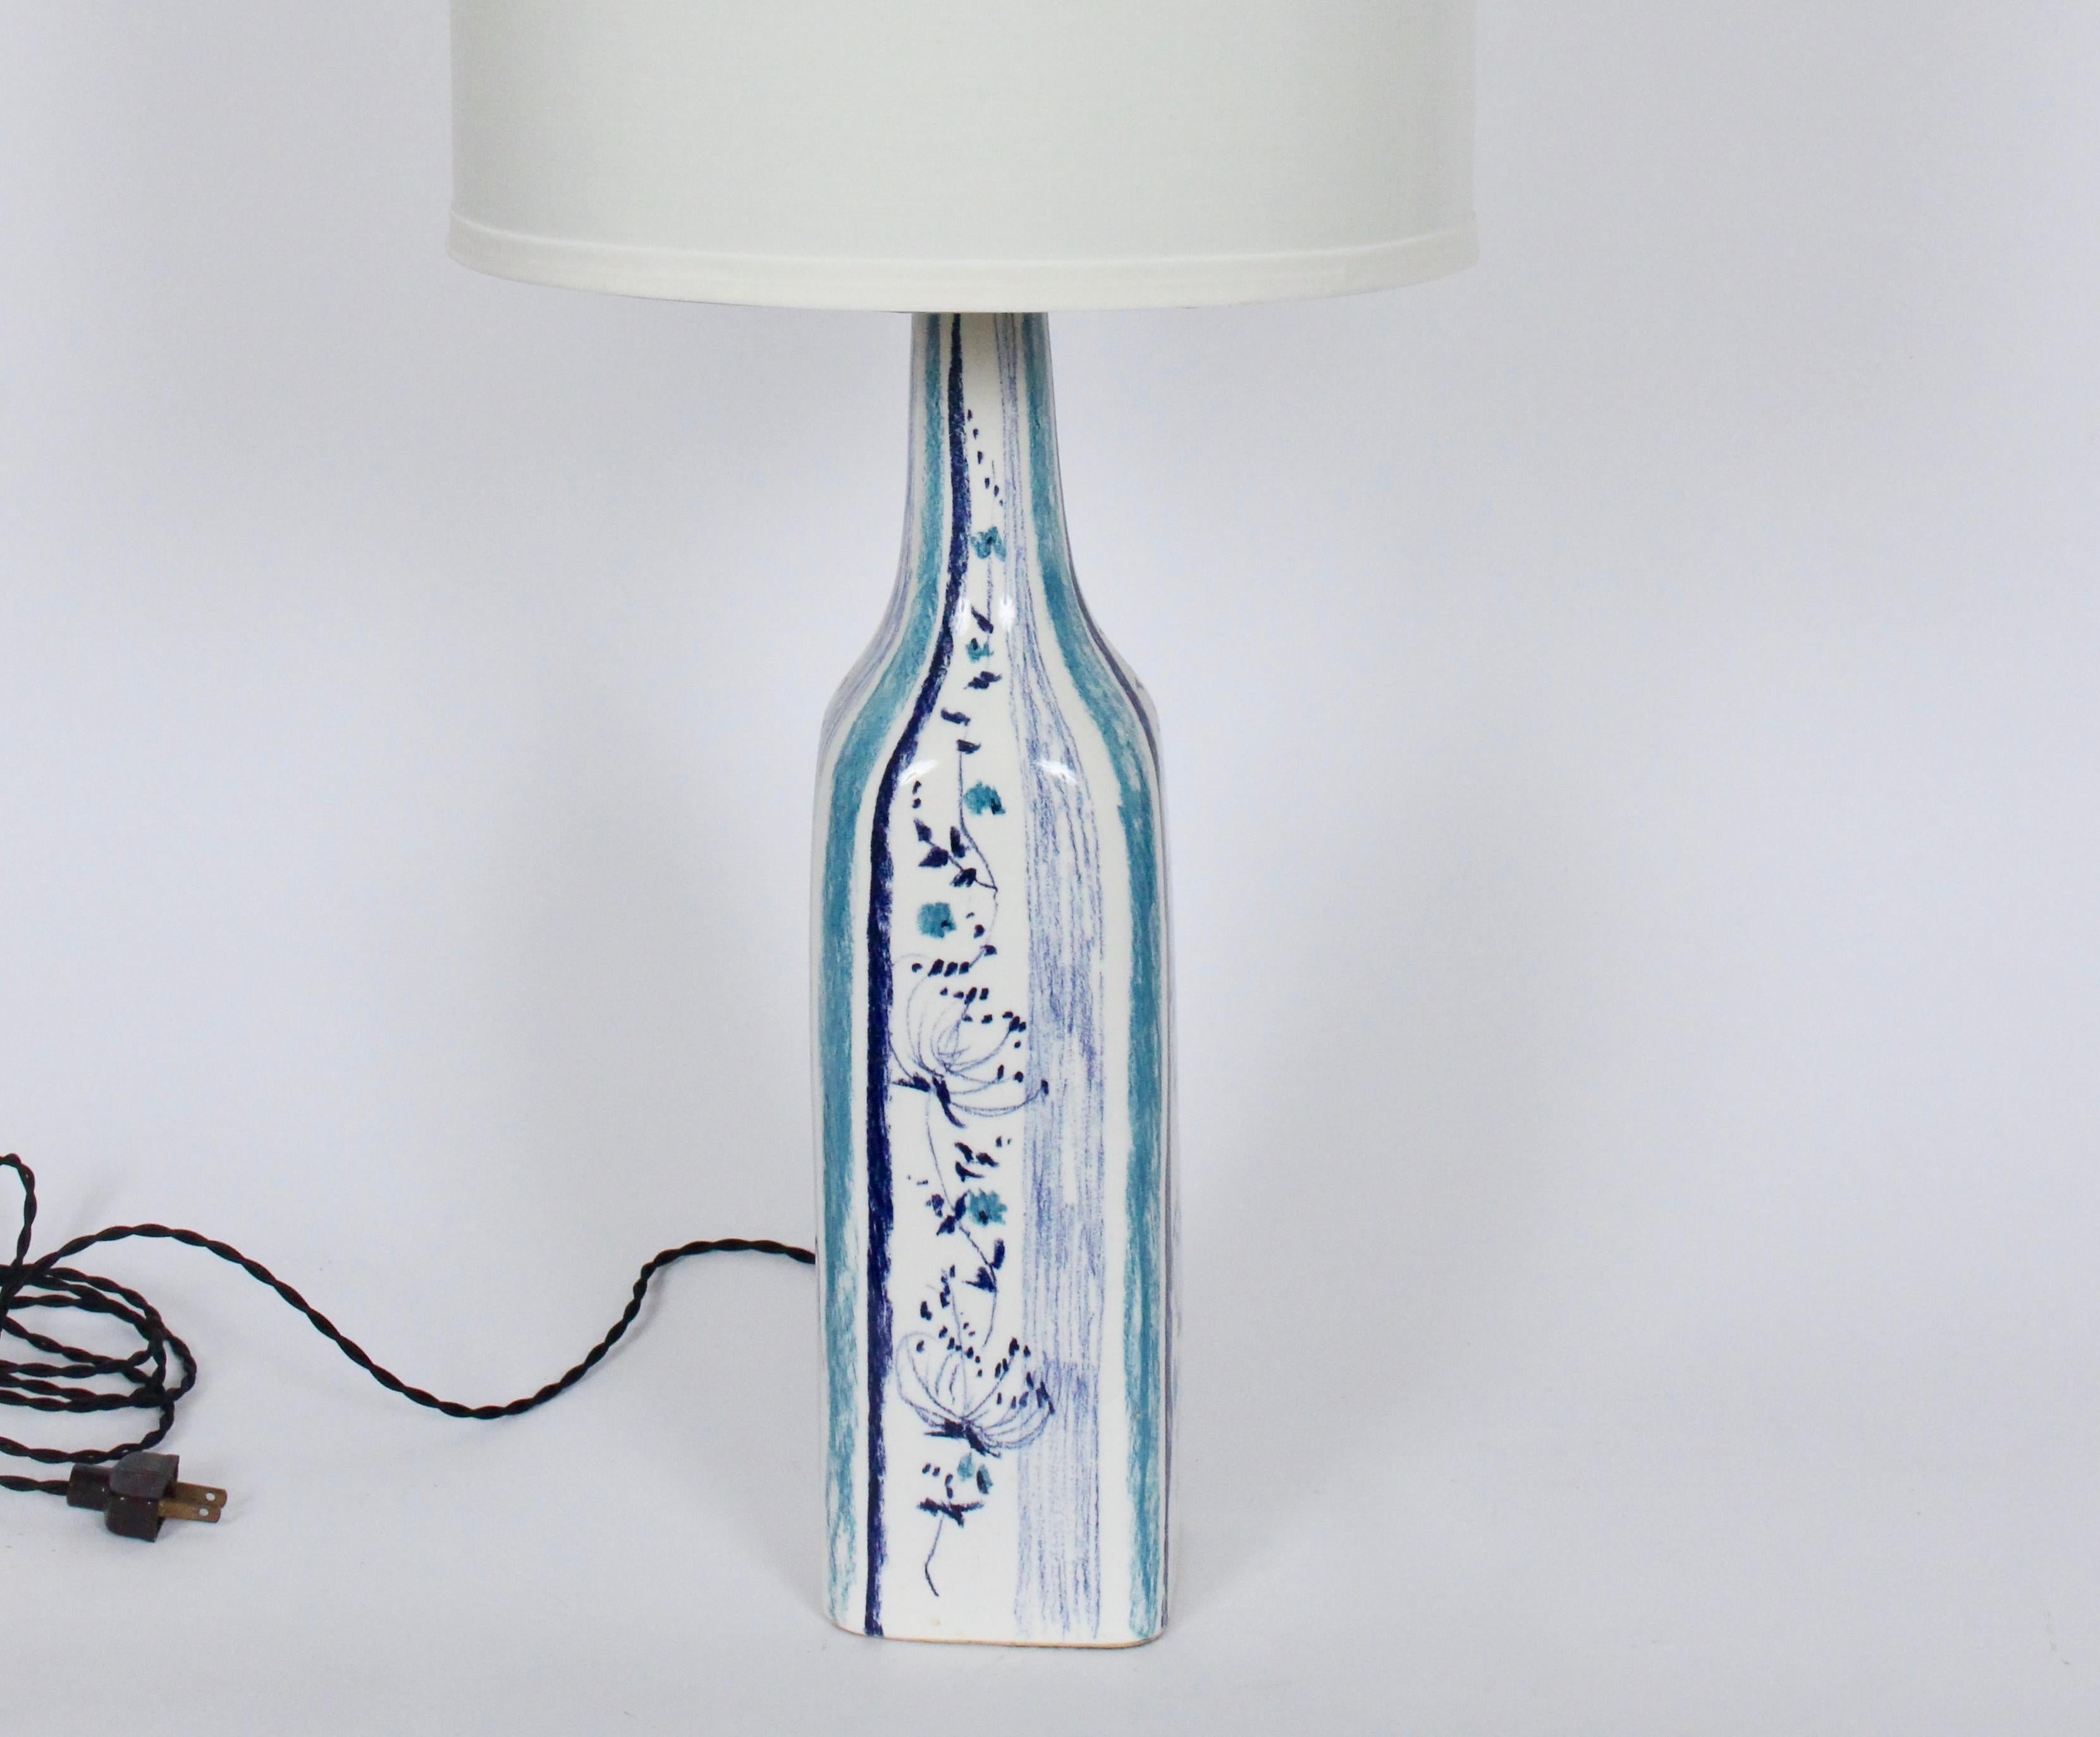 Viso Italian Modern handcrafted blue, Turquoise glazed pottery table lamp. Featuring a bottle form delicately painted with Queens Anne Lace in hues of blue and detailed with Cerulean and navy blue vertical striping. Measures: 20H to top of socket.